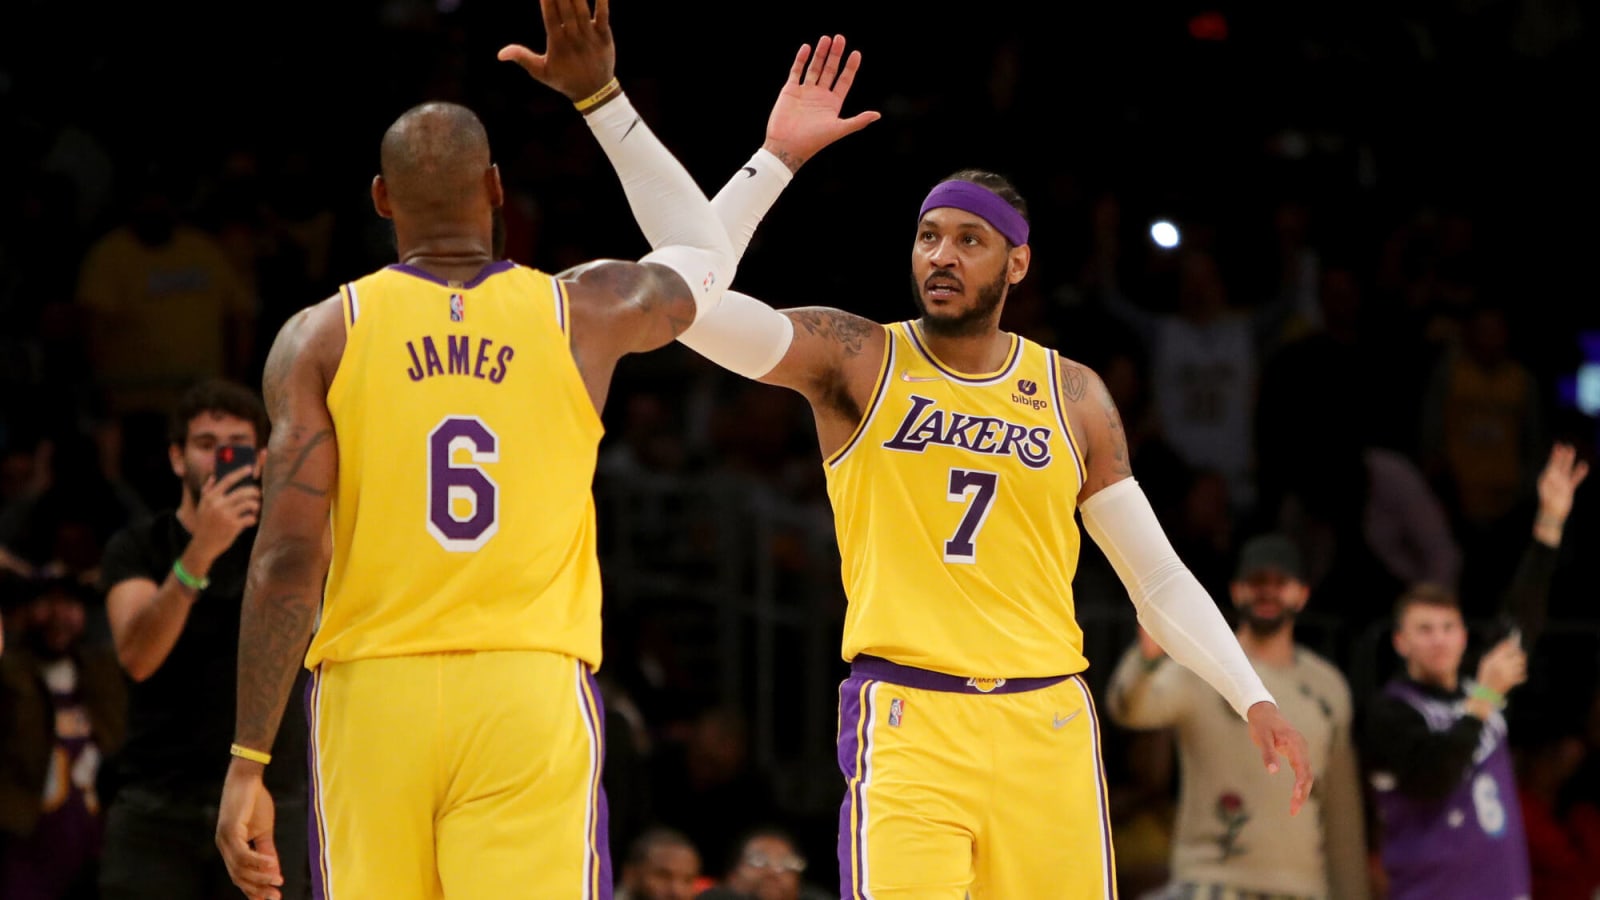 WATCH: Carmelo Anthony practices in Lakers gear for first time